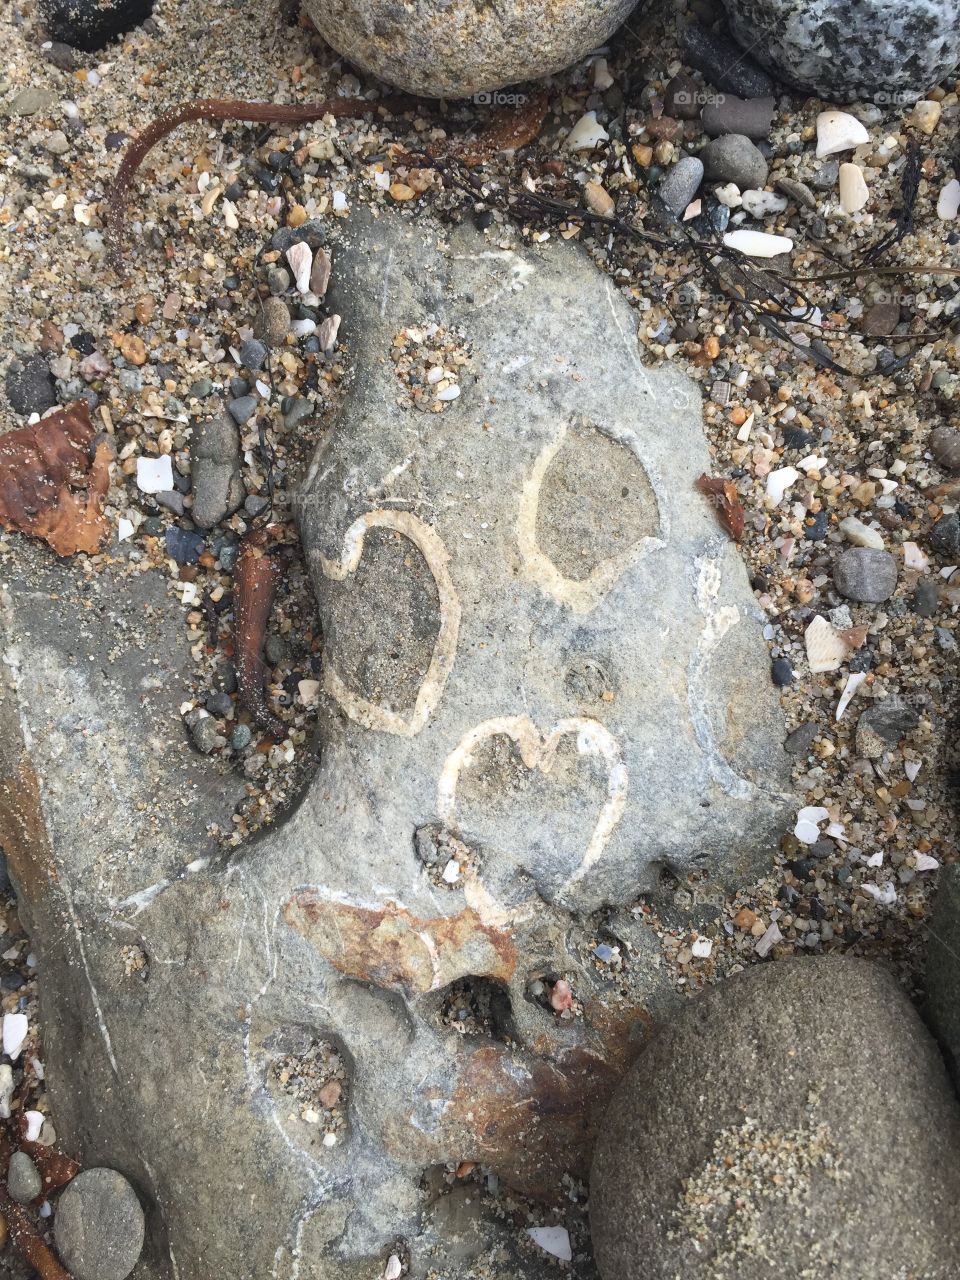 Heart fossil